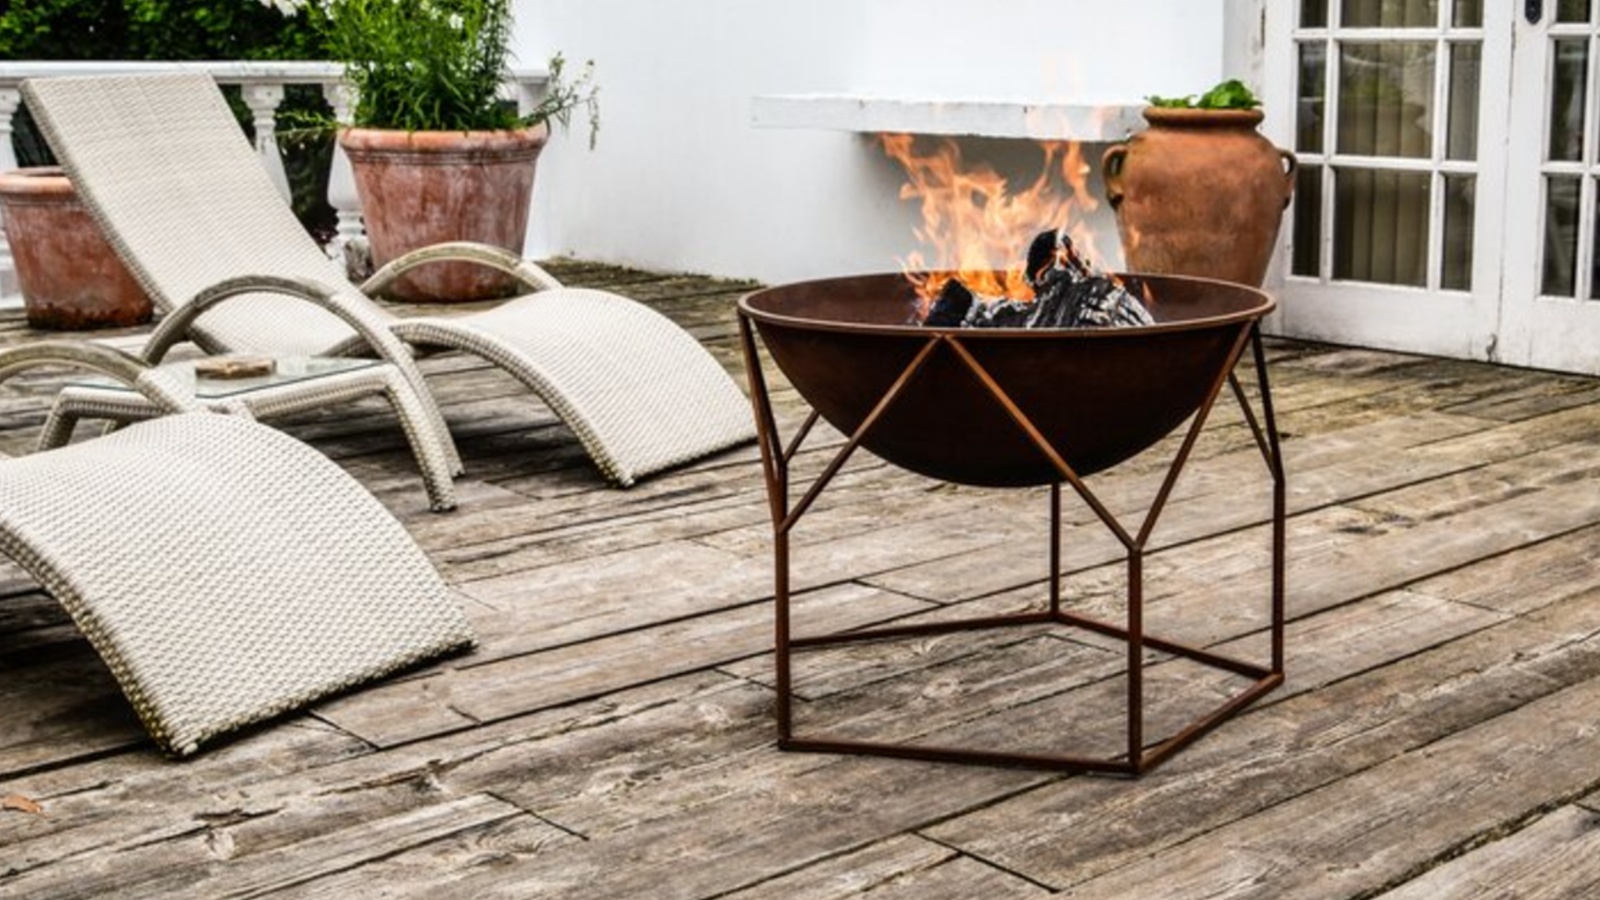 Cyber Monday Fire Pits This Pit, Black Friday Fire Pit